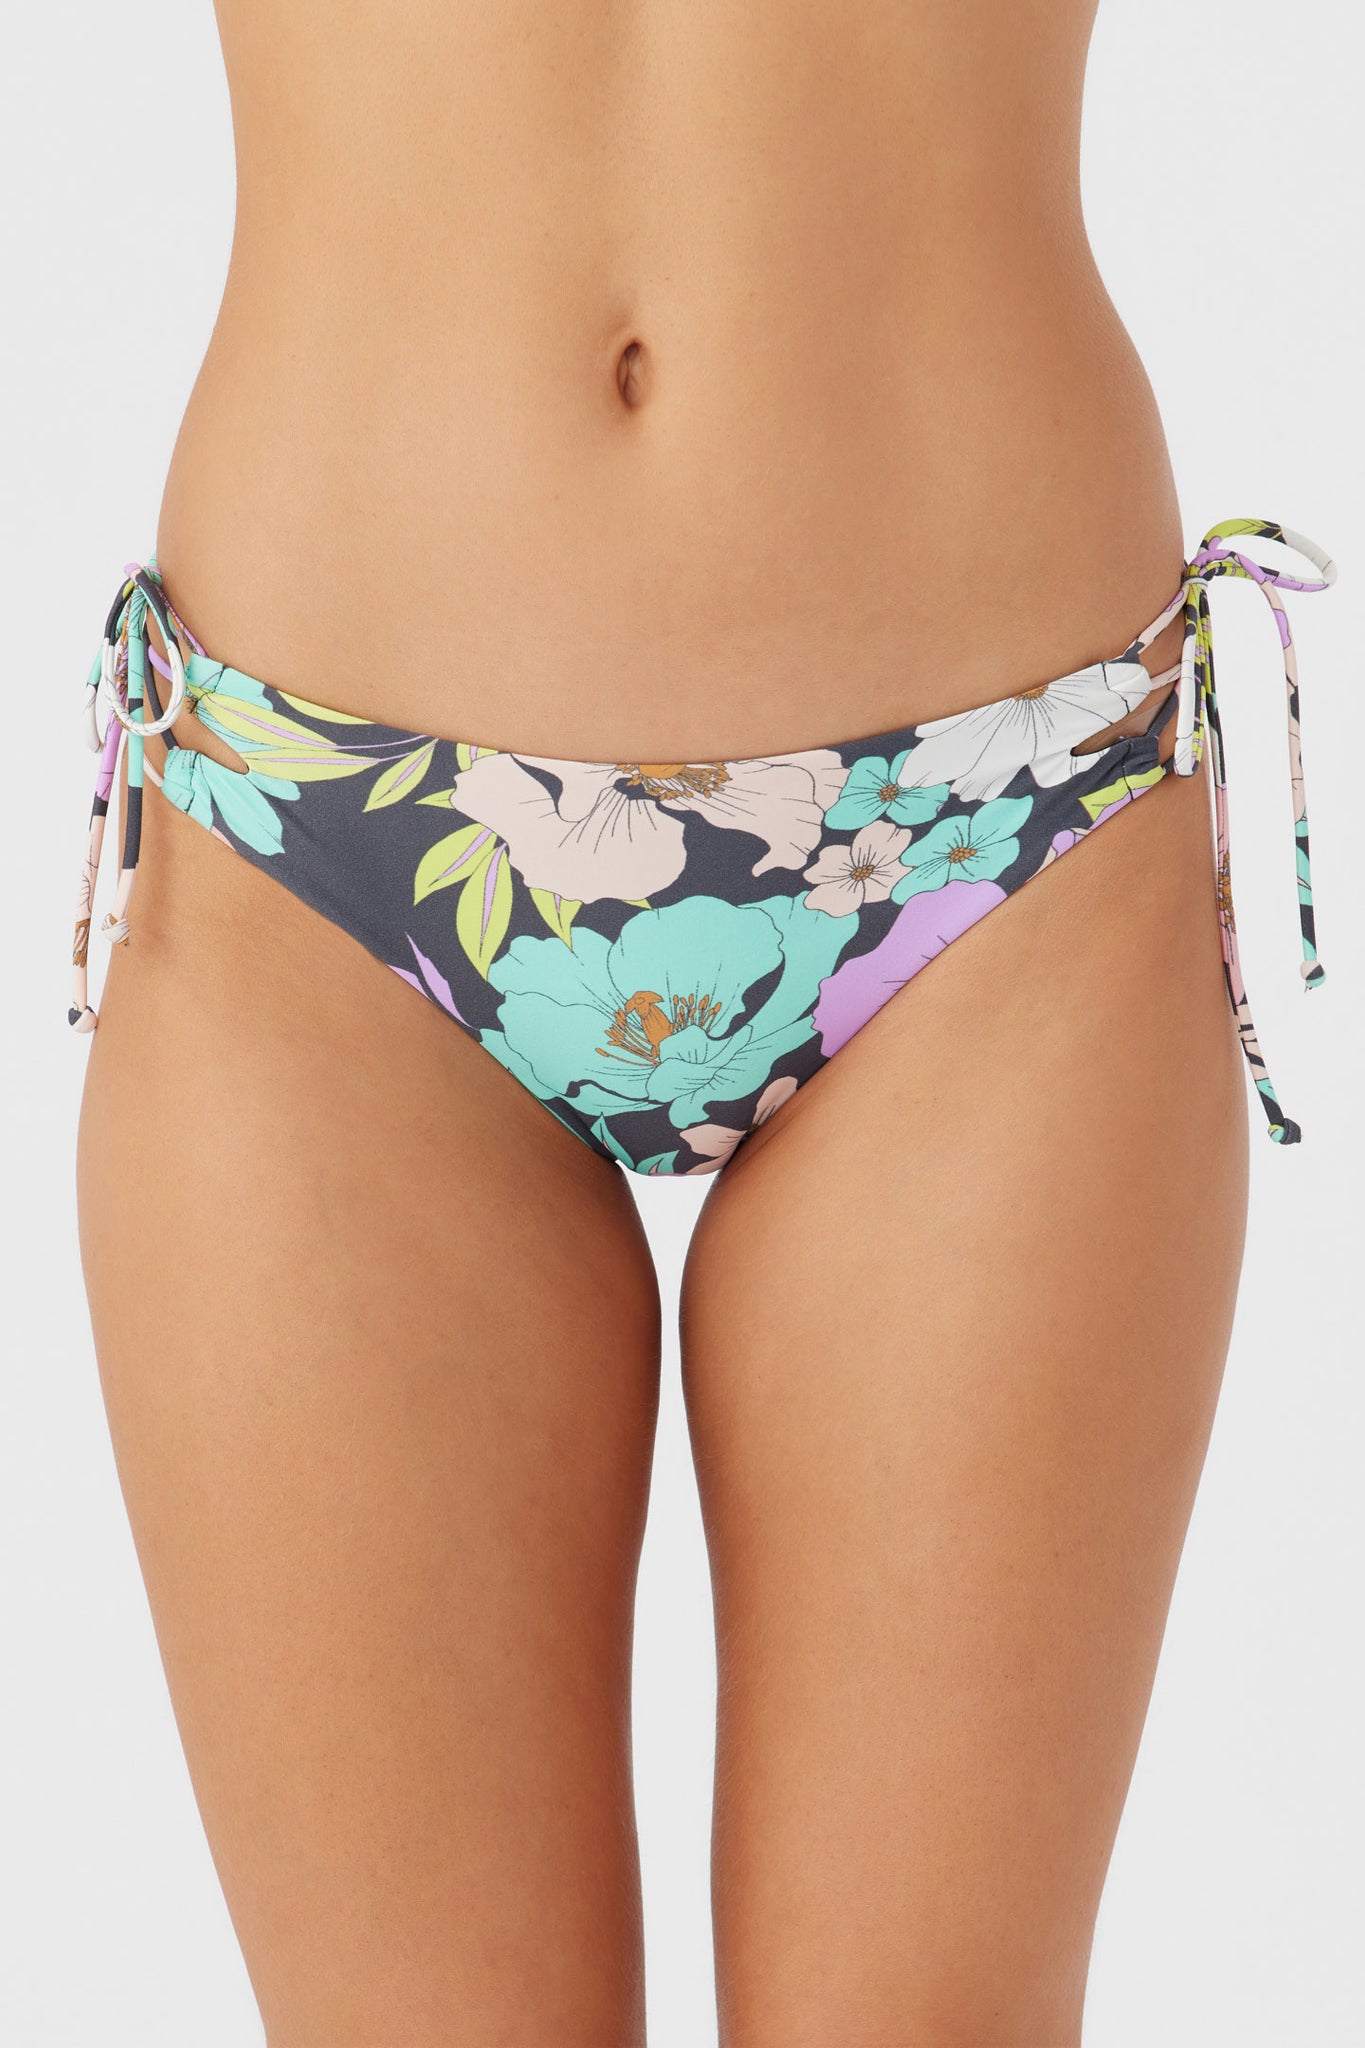 A String Bikini: J.Crew String Bikini Top and String Hipster Full Coverage  Bikini Bottom, 11 Swimsuits From J.Crew That Are Both Practical and  Eye-Catching